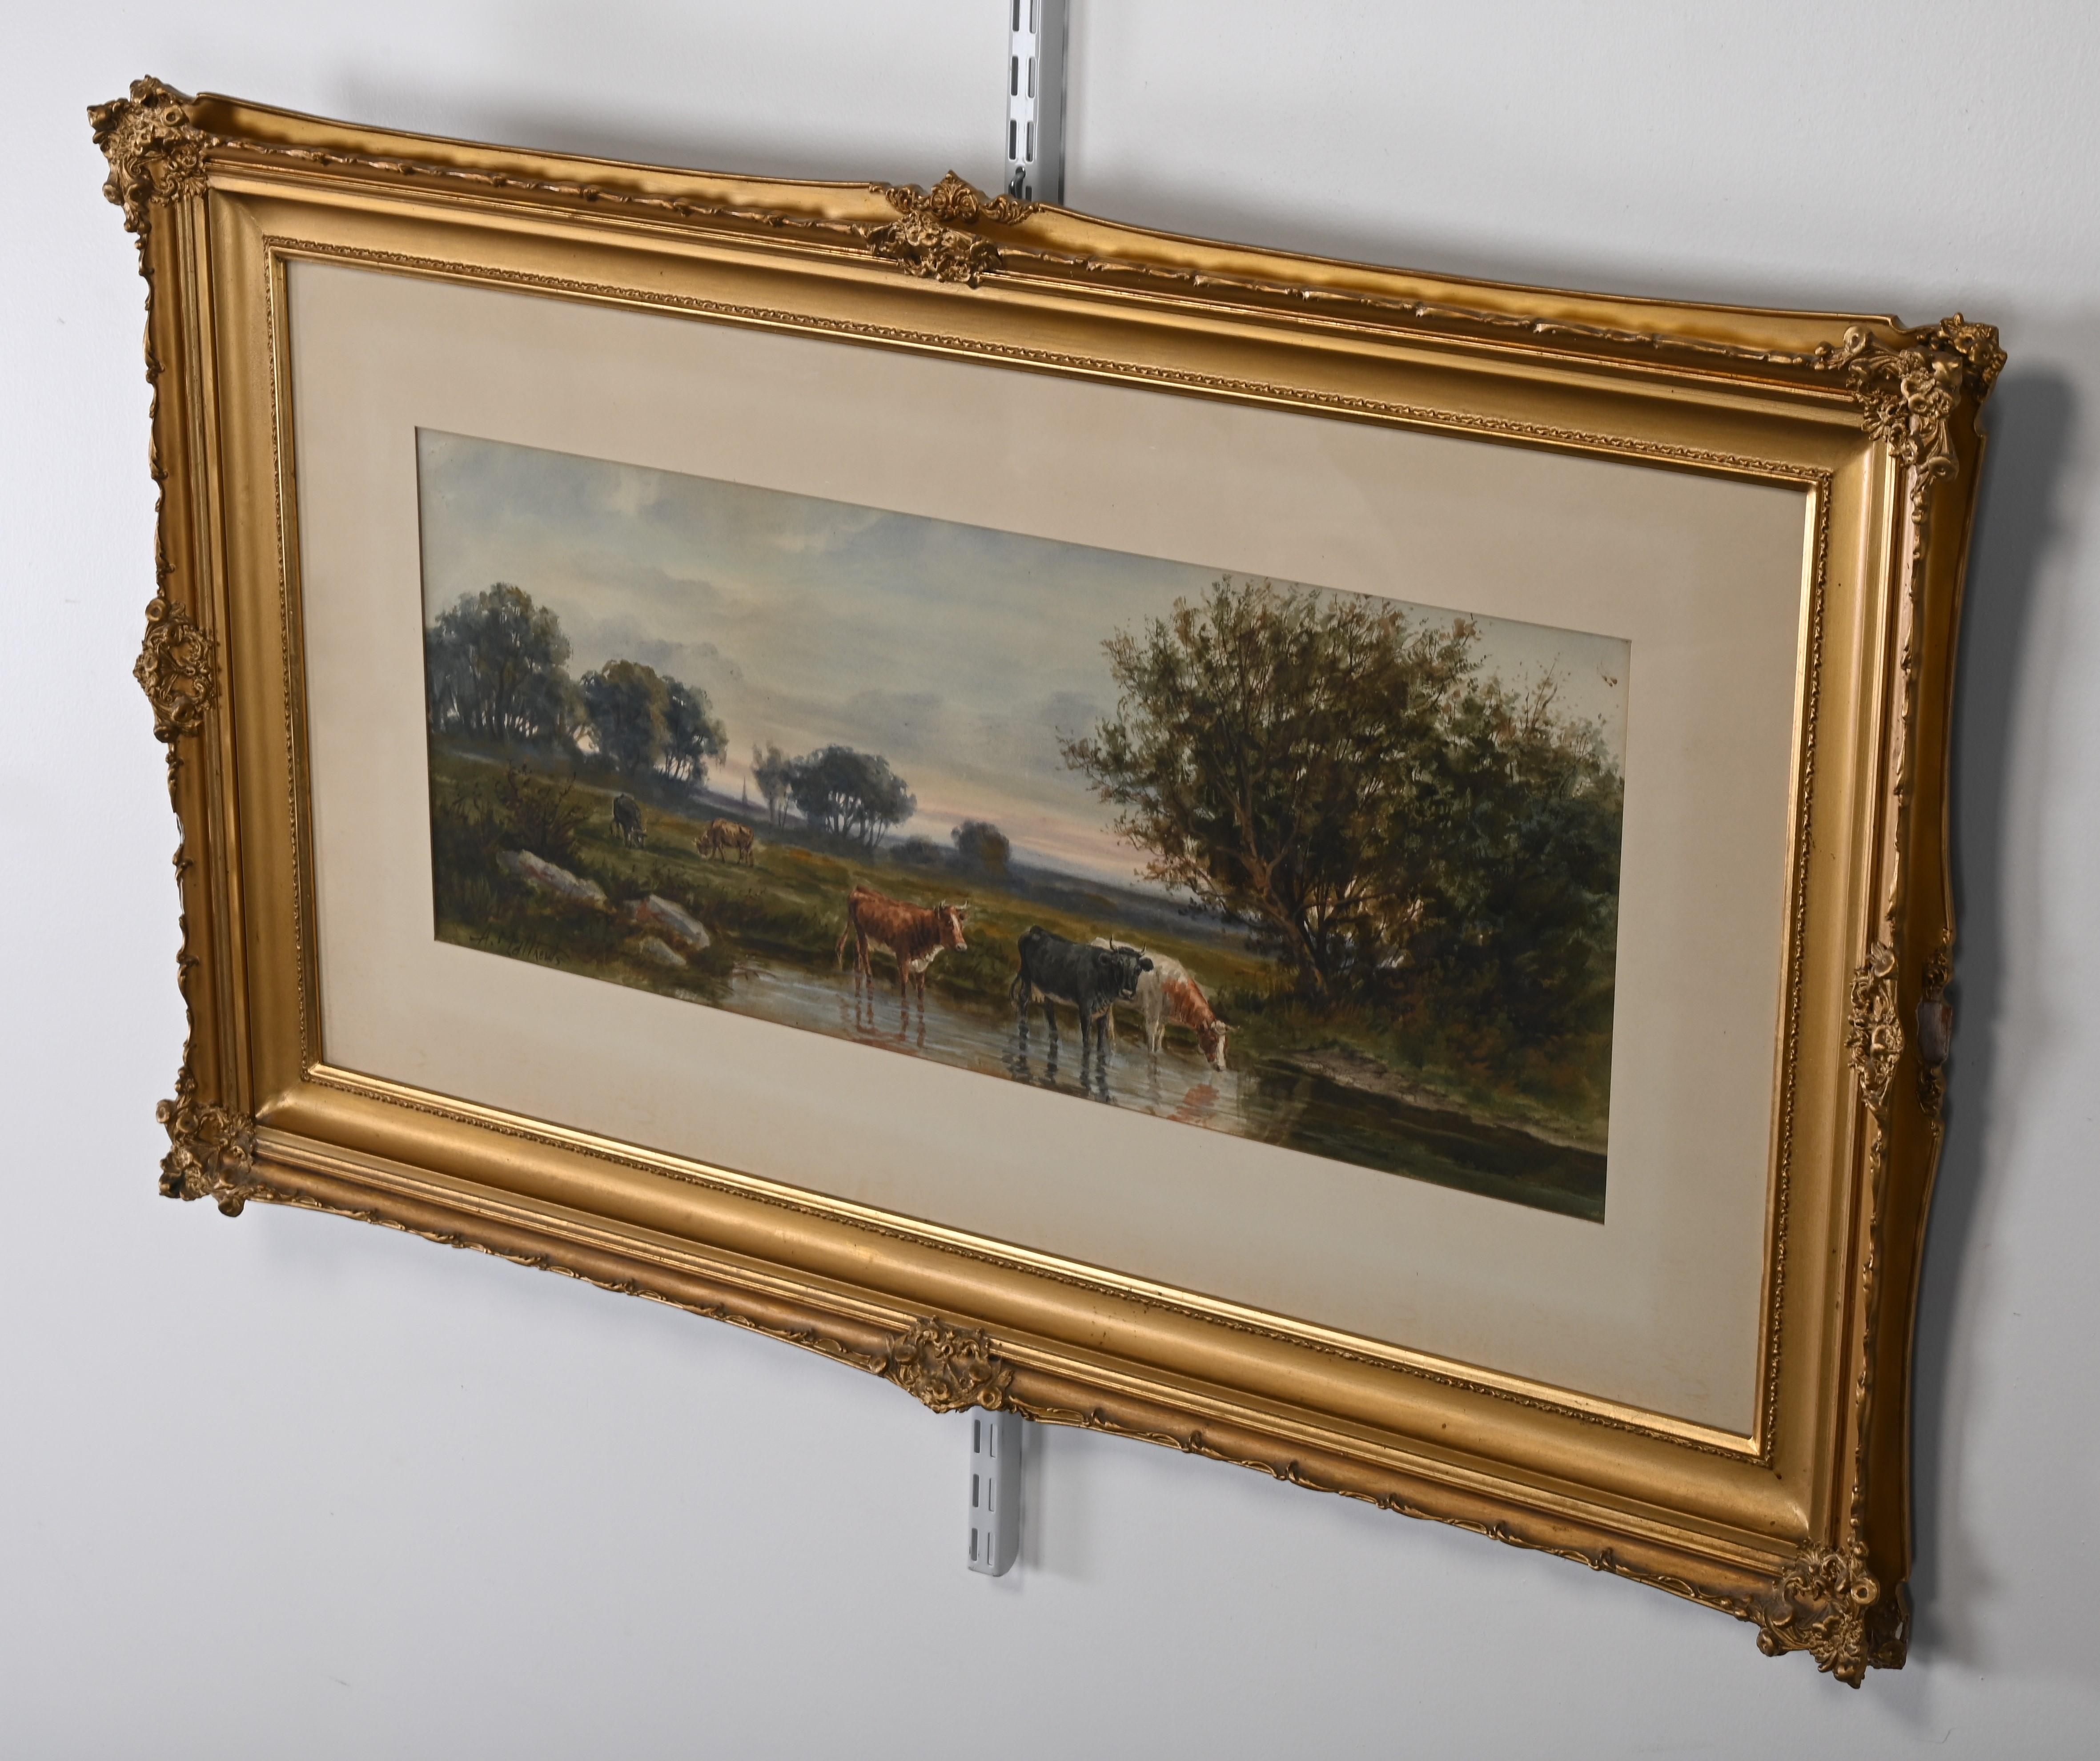 19th Century Watercolor Painting of a Landscape with Cattle Watering by A. Matthews